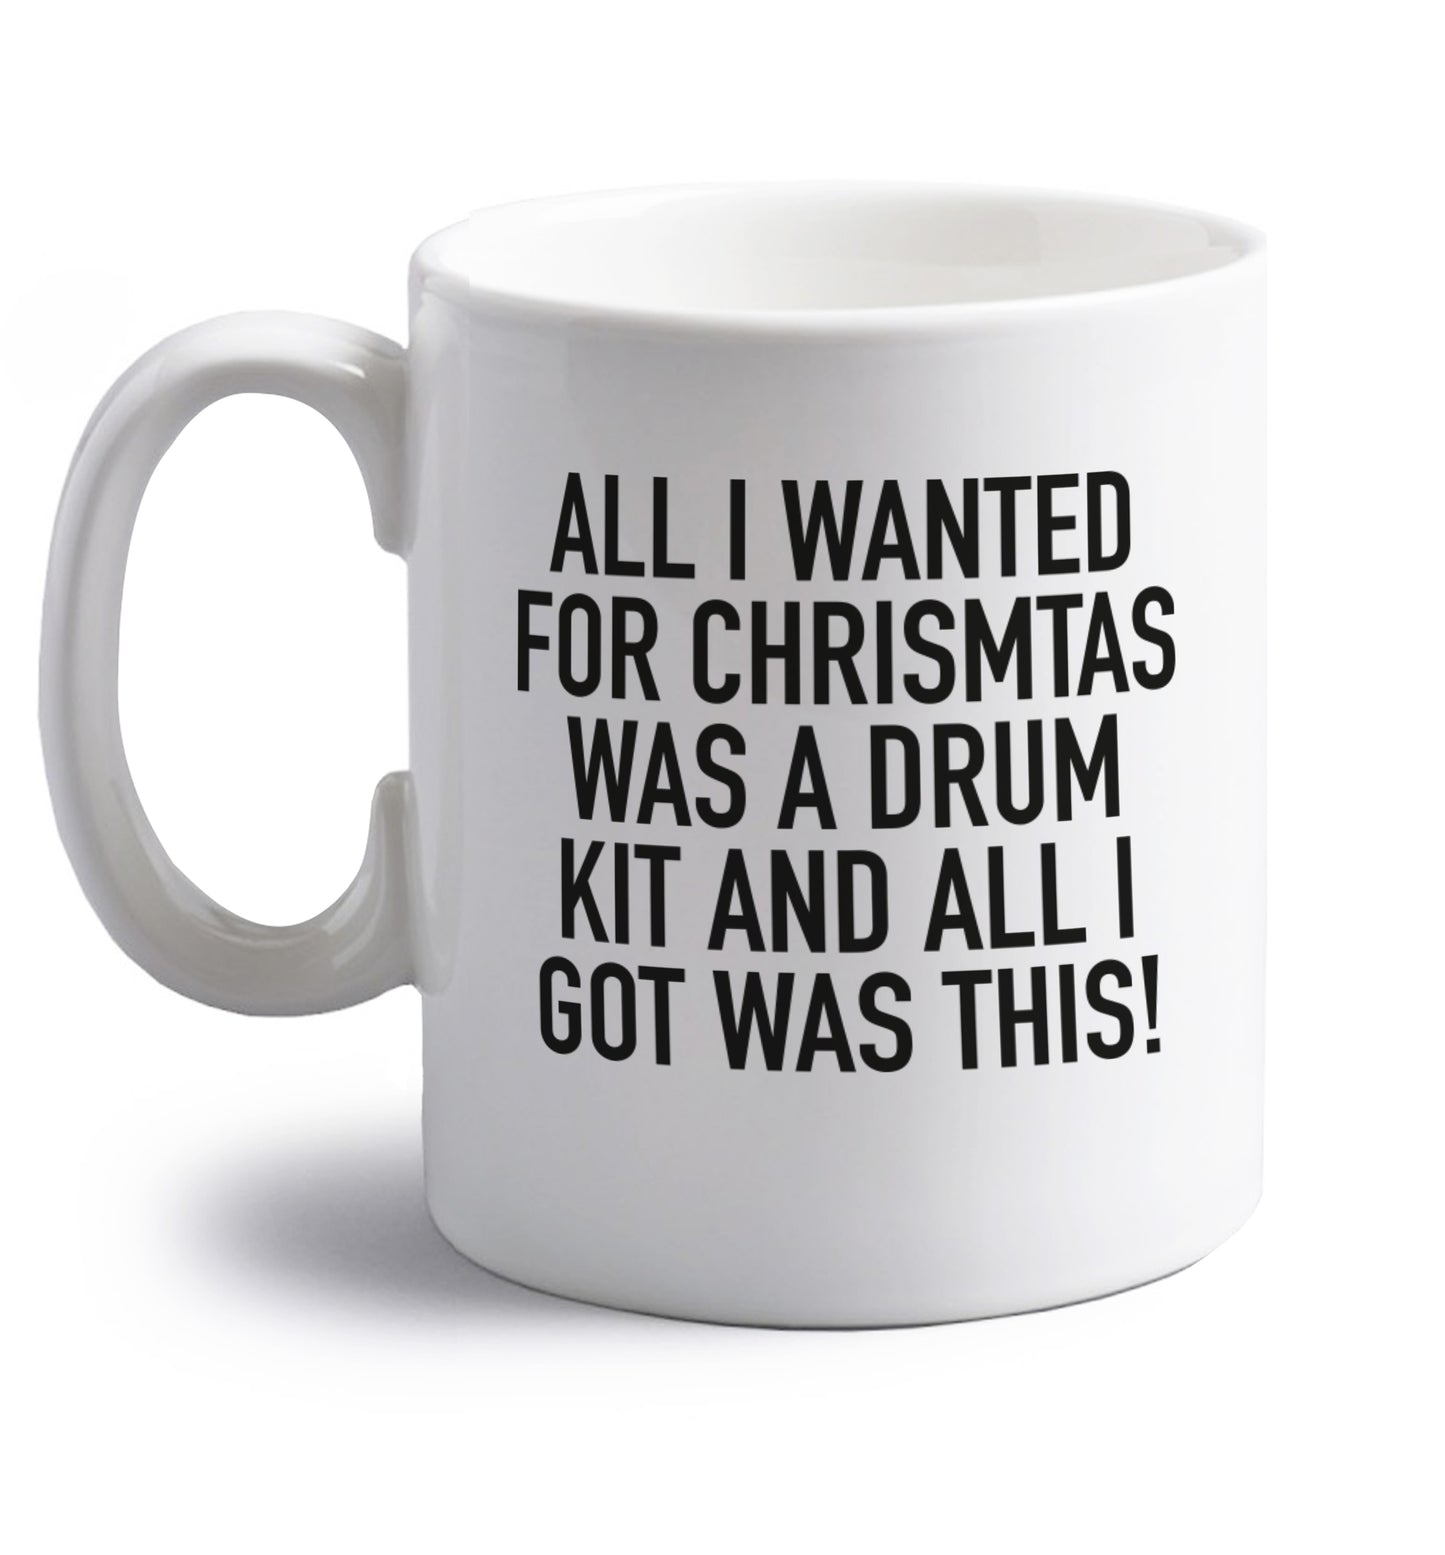 All I wanted for Christmas was a drum kit and all I got was this! right handed white ceramic mug 